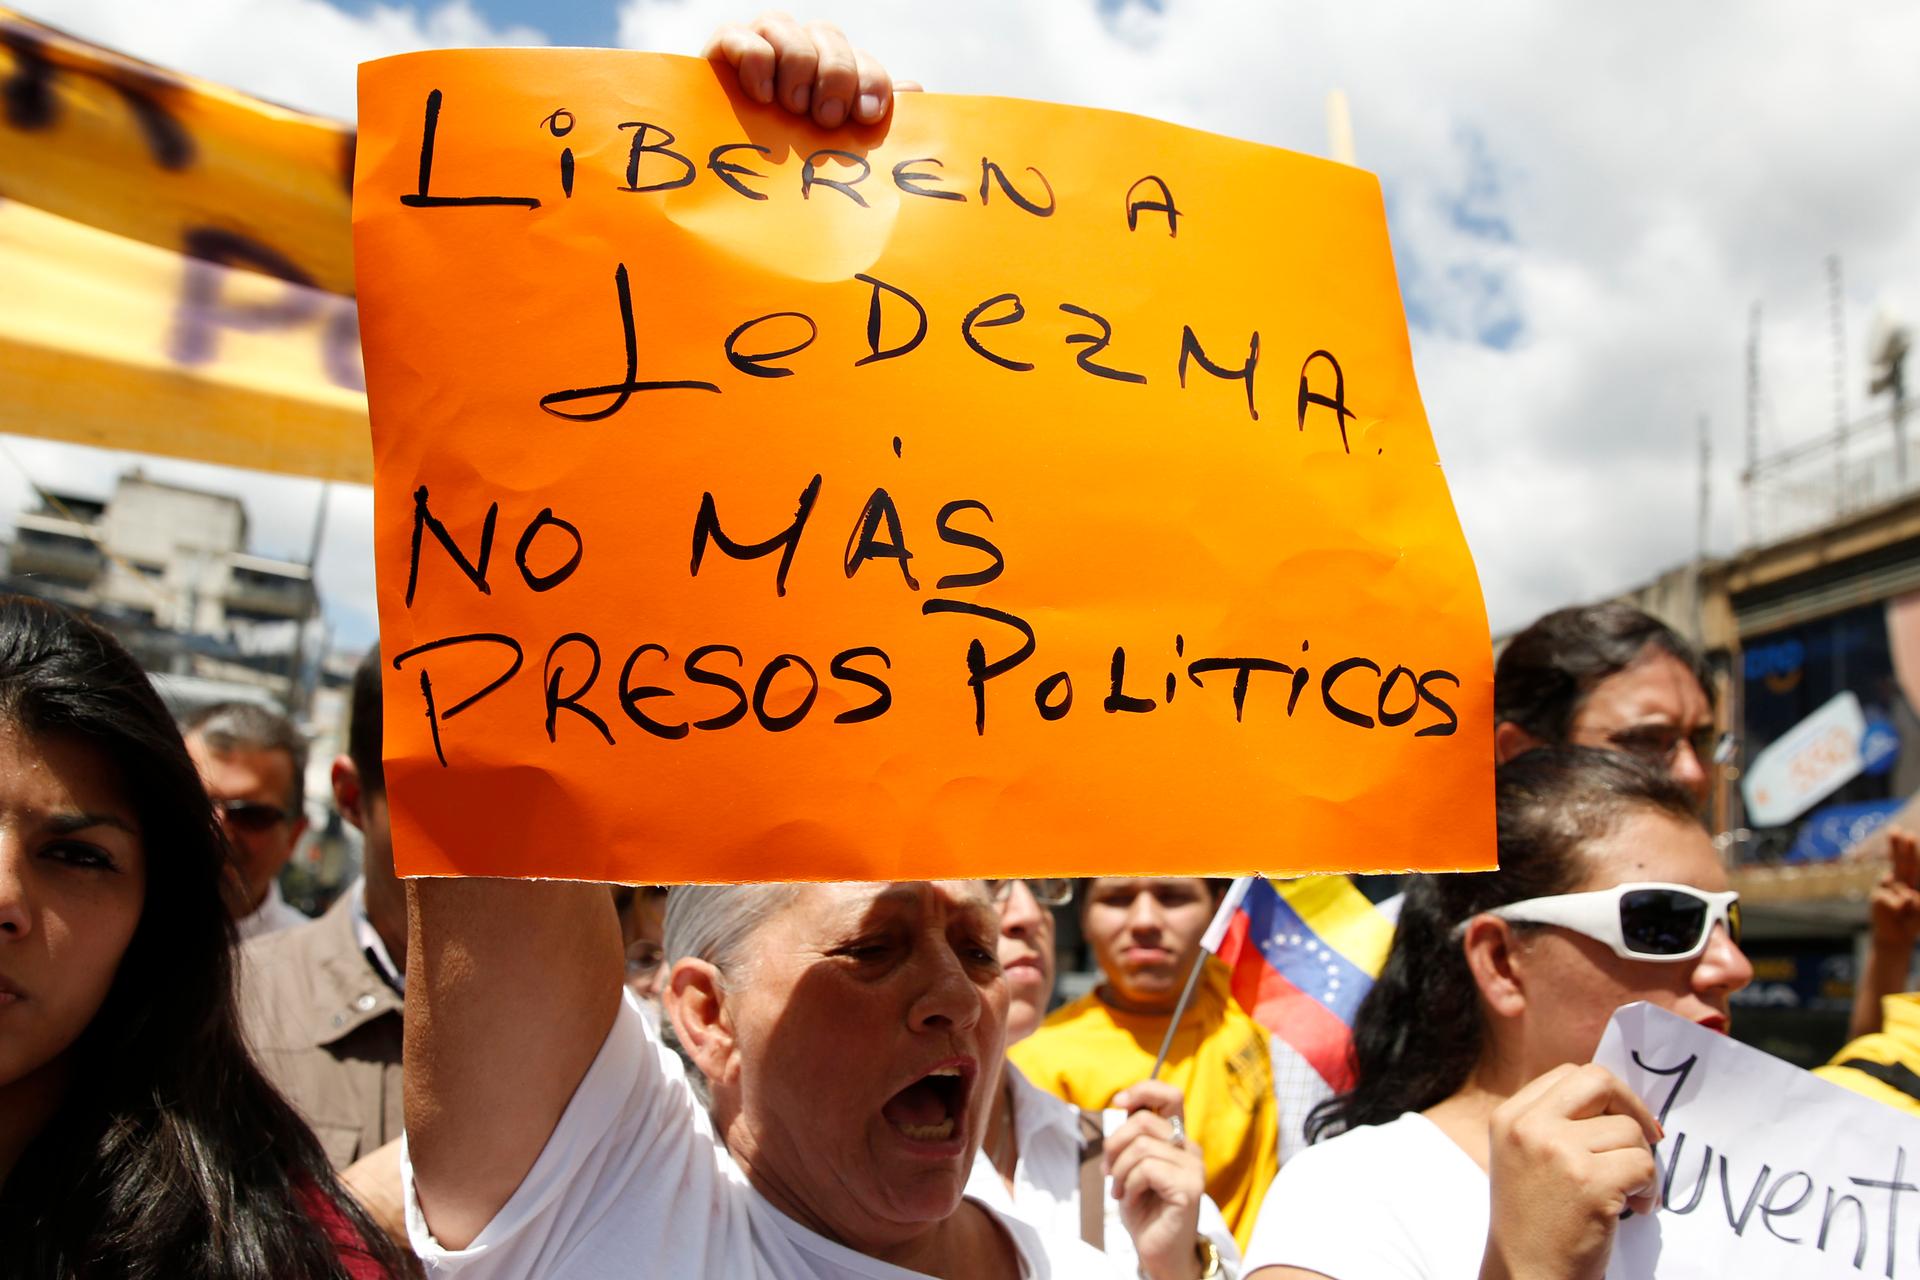 Supporters of Caracas mayor Antonio Ledezma gather to protest his arrest by President Nicolas Maduro. The banner reads: "Freedom to Ledezma. No more political prisoners". 